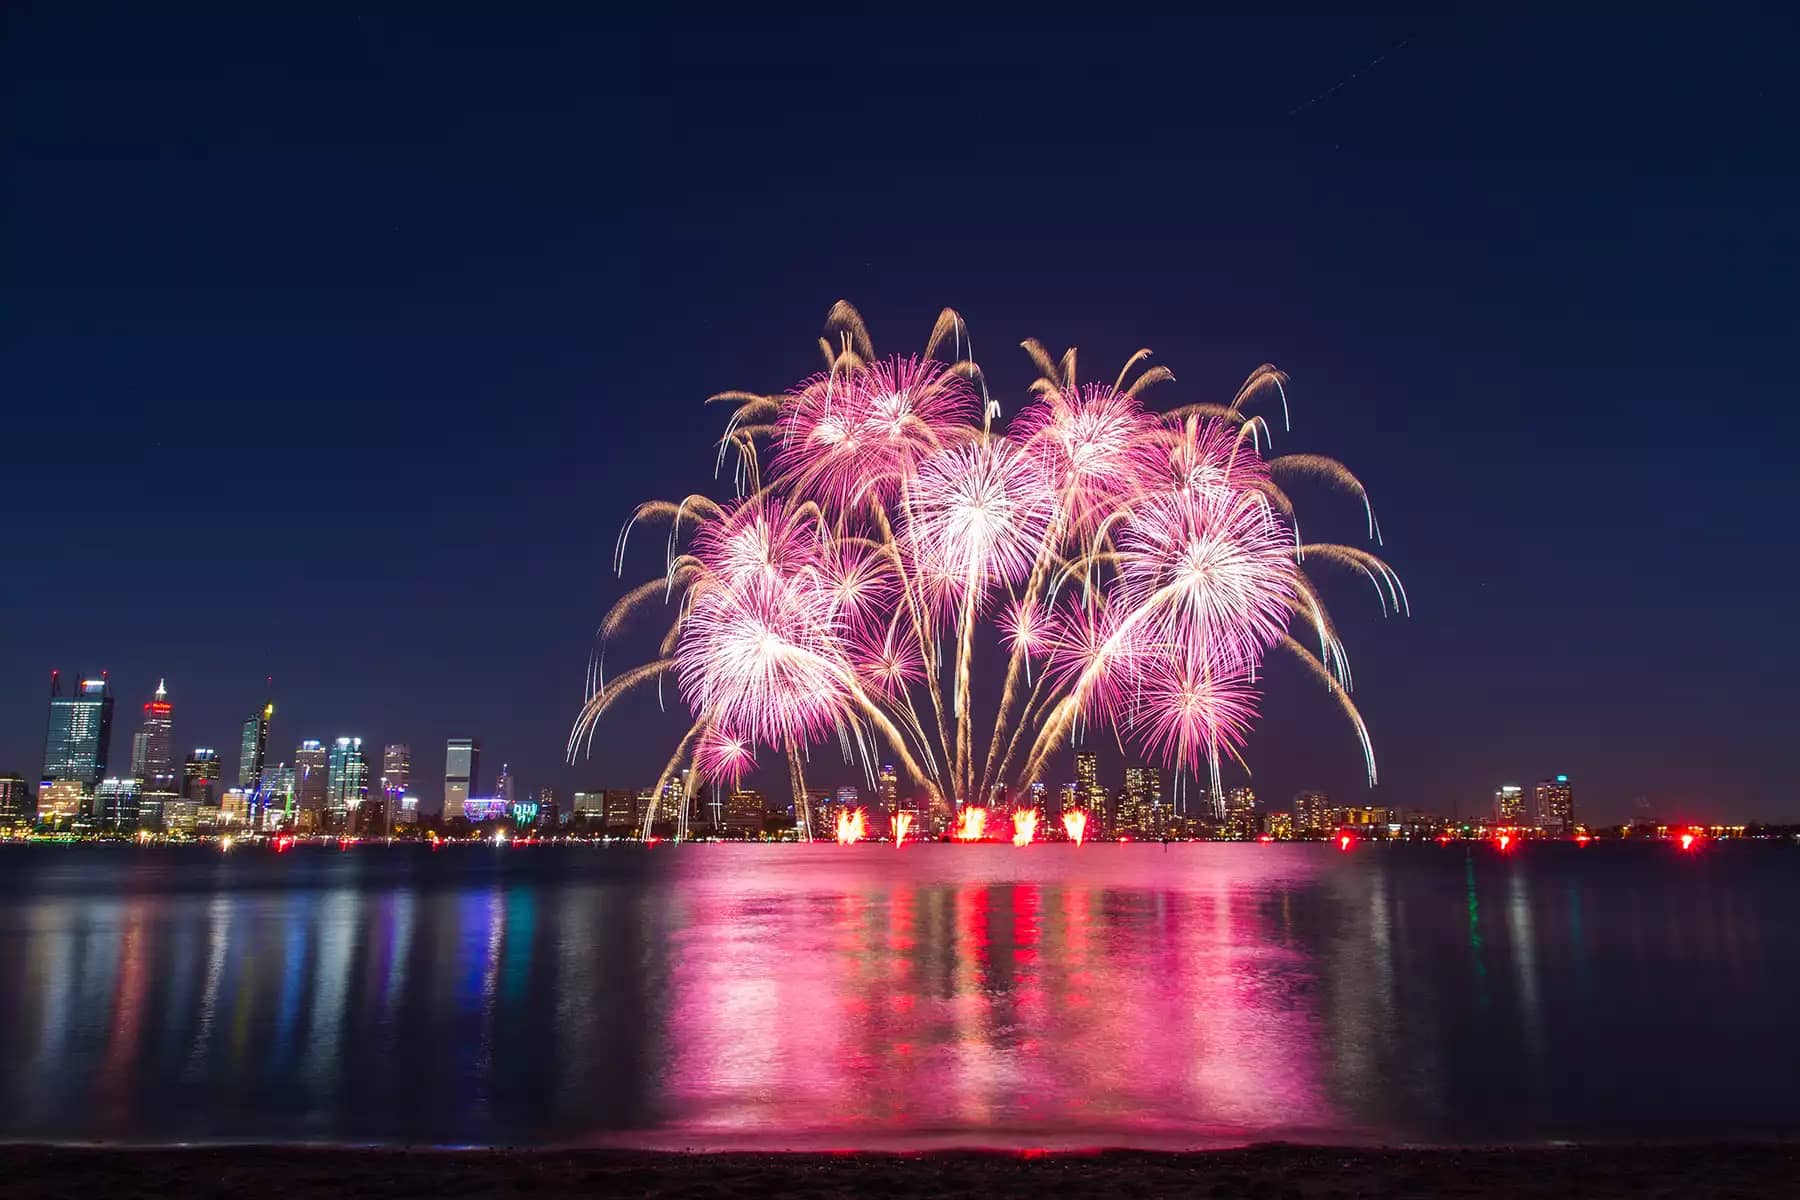 fireworks display over a lake with city skyline